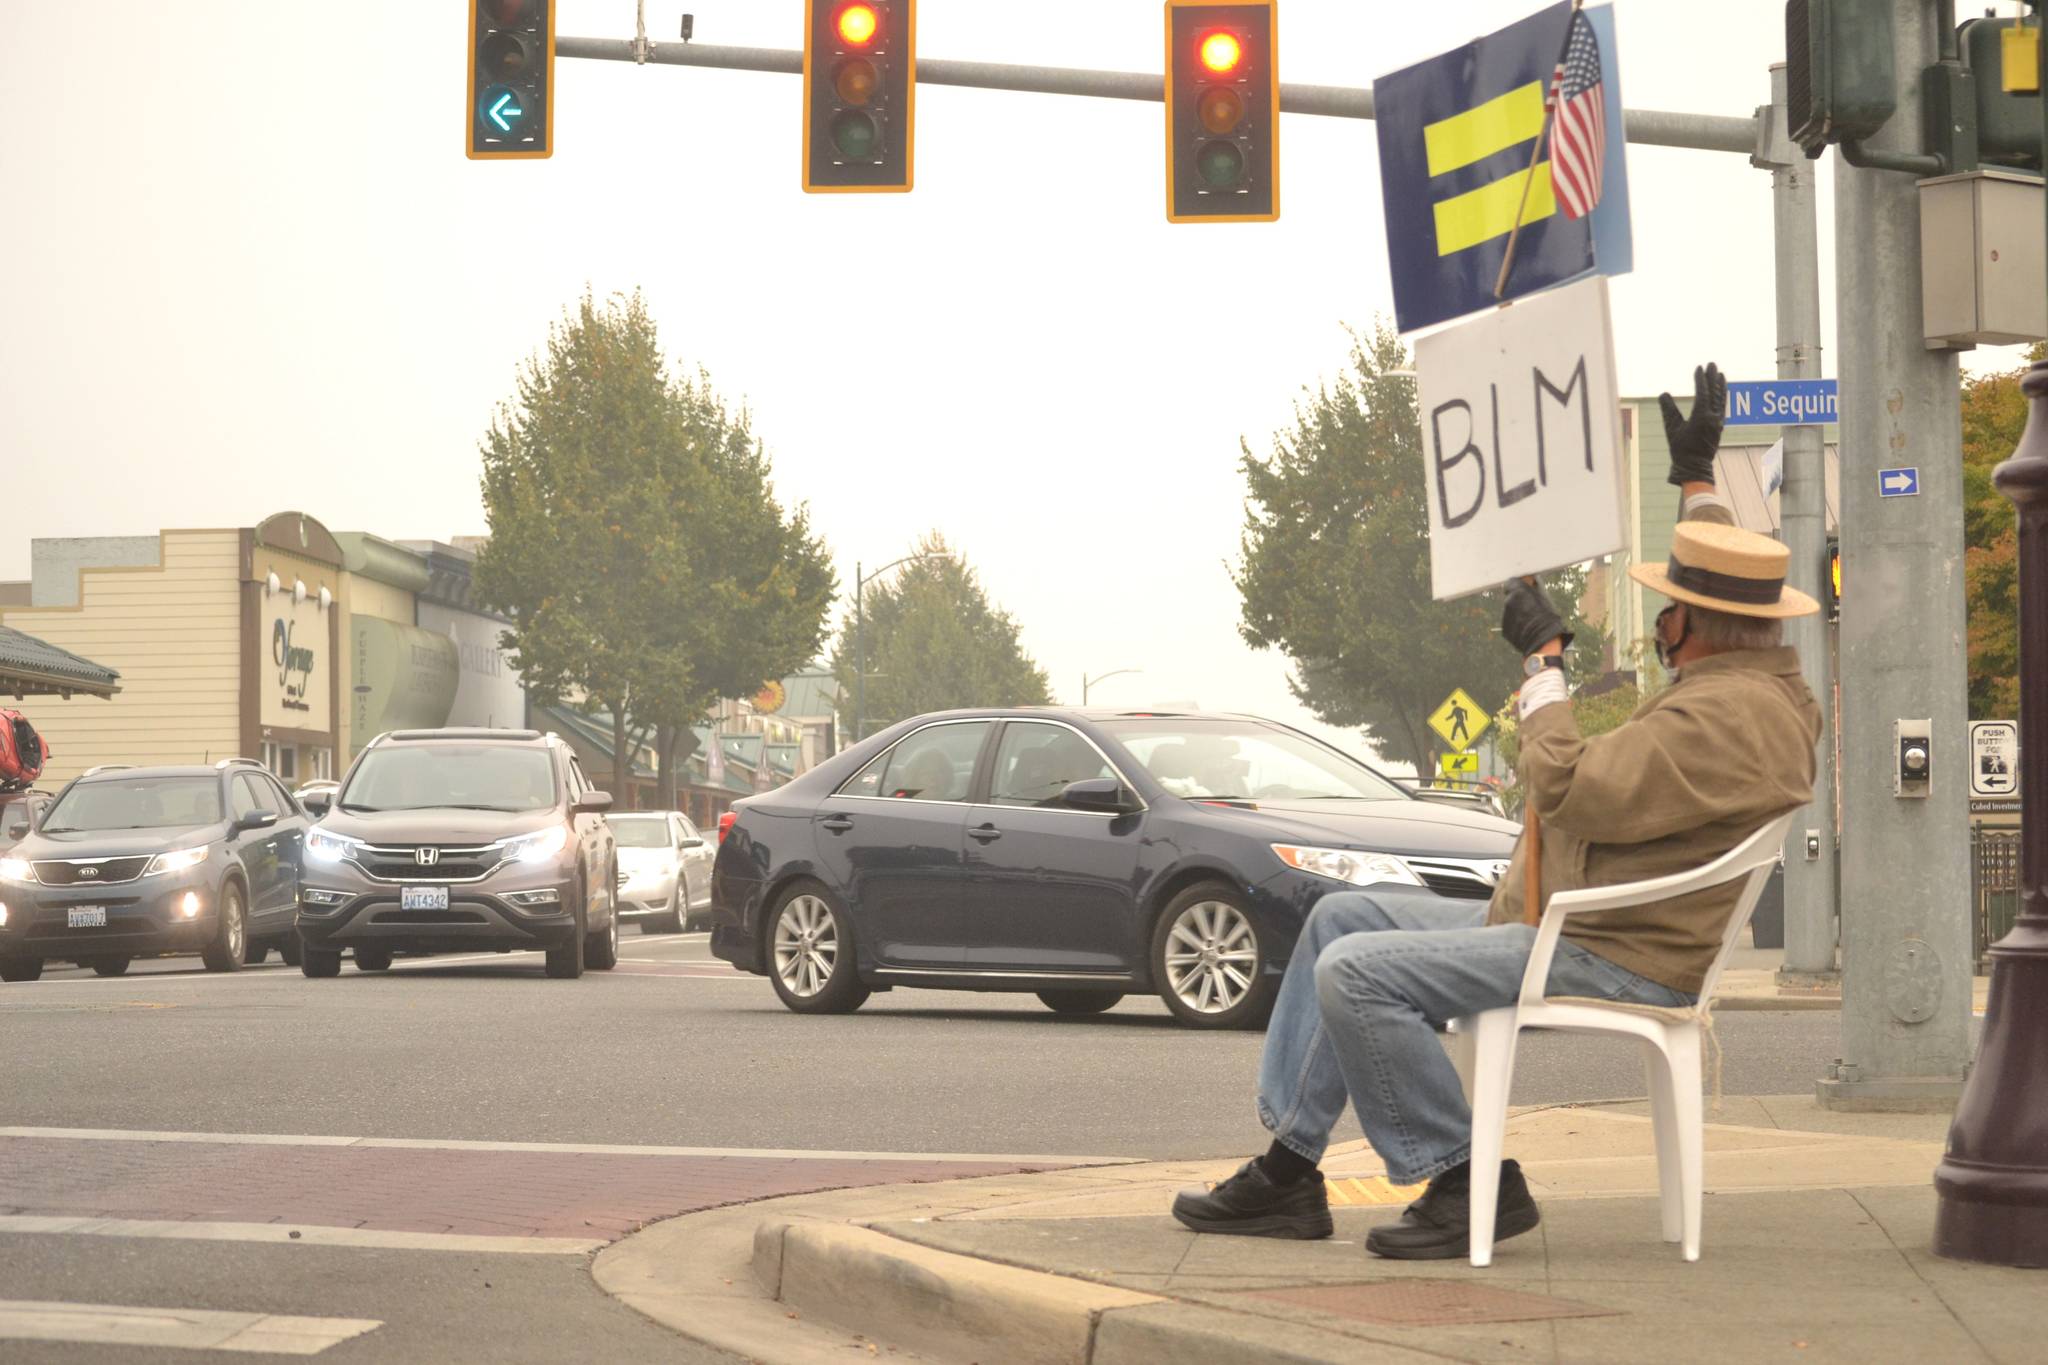 For more than 110 consecutive days, Sequim’s Neil Morris has set aside 3-plus hours to wave and hold signs showing his support for Black Lives Matter and the Human Rights Campaign. “I just want people to be aware,” Morris said. “I don’t know what else I could do. I piss off a lot of people and I think that is a good thing.” Sequim Gazette photo by Matthew Nash